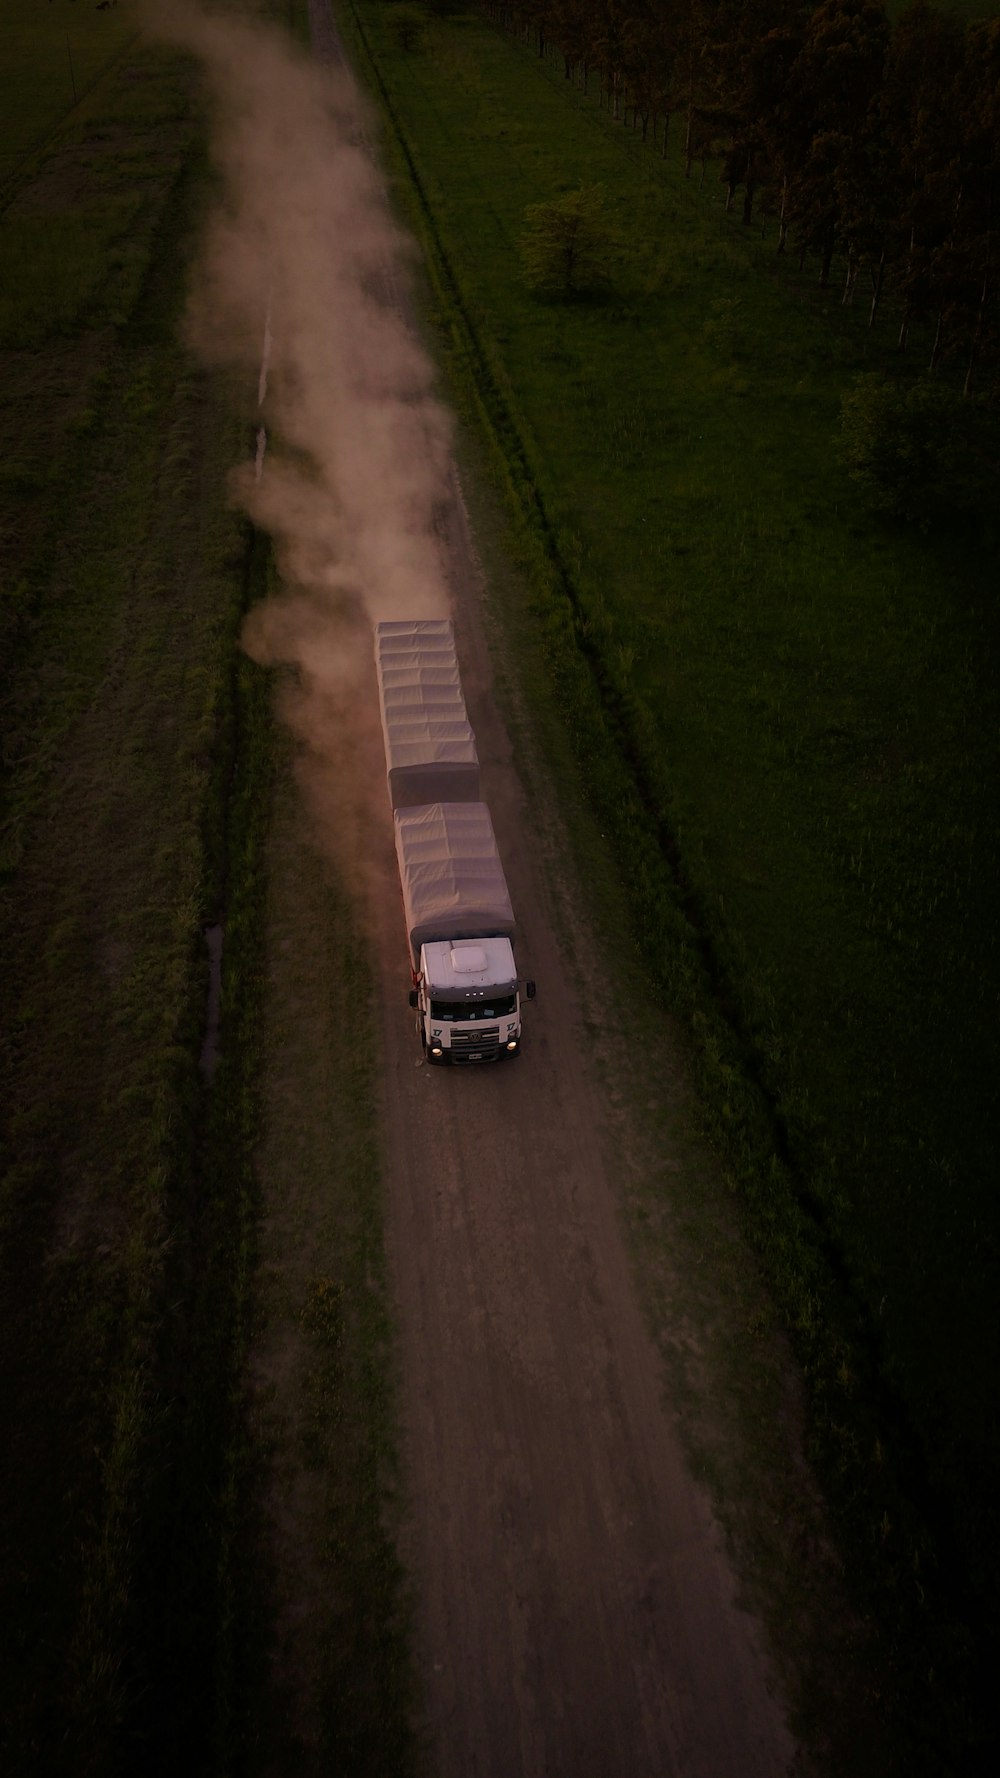 a truck driving down a dirt road next to a lush green field